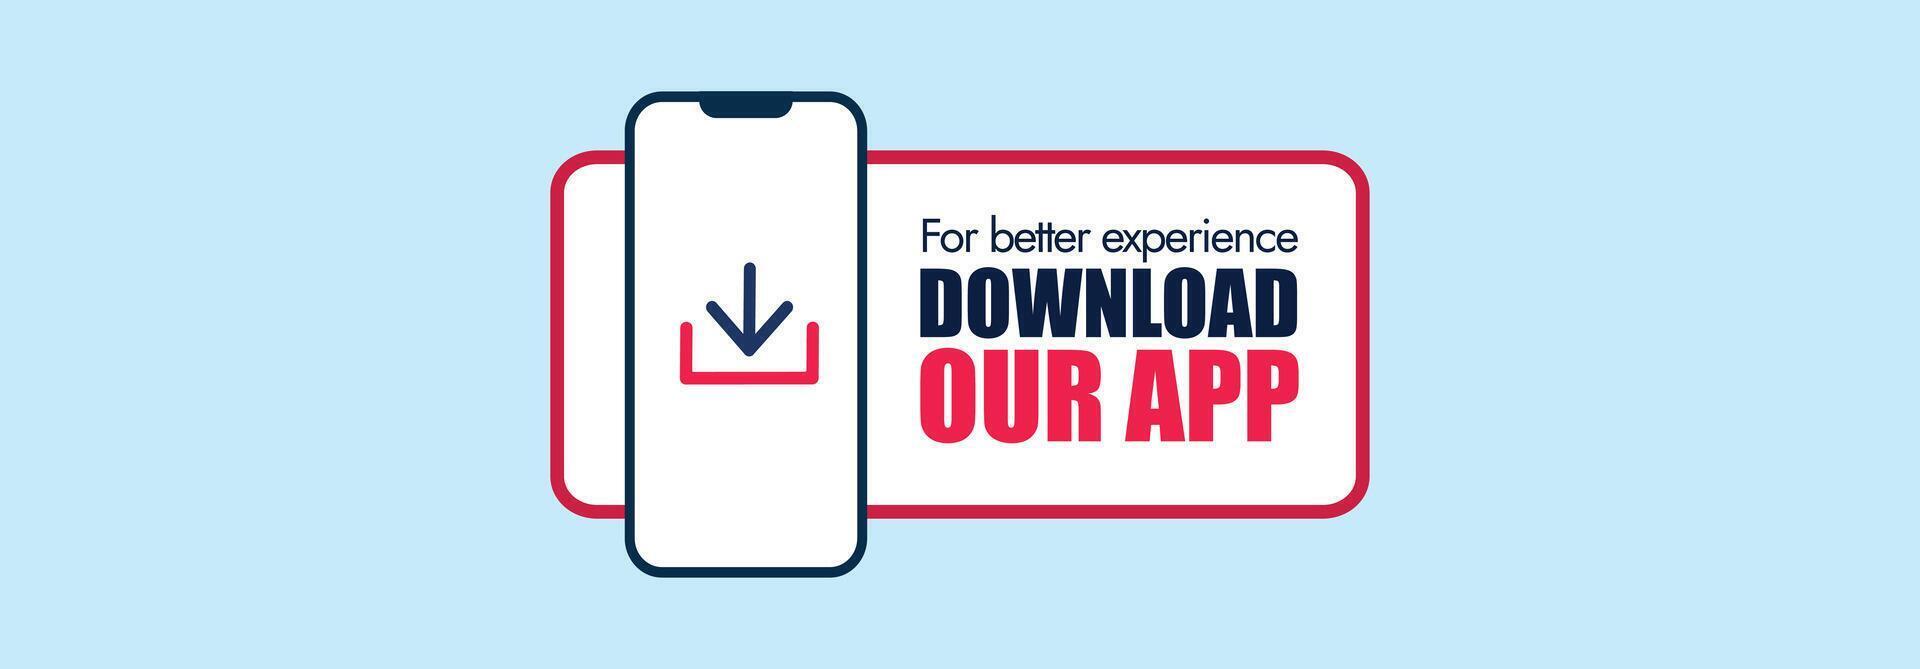 Download the app now. Download our app icon, label cover with mobile device and download icon. Social media cover promoting app downloading. App Marketing or Promotion banner vector